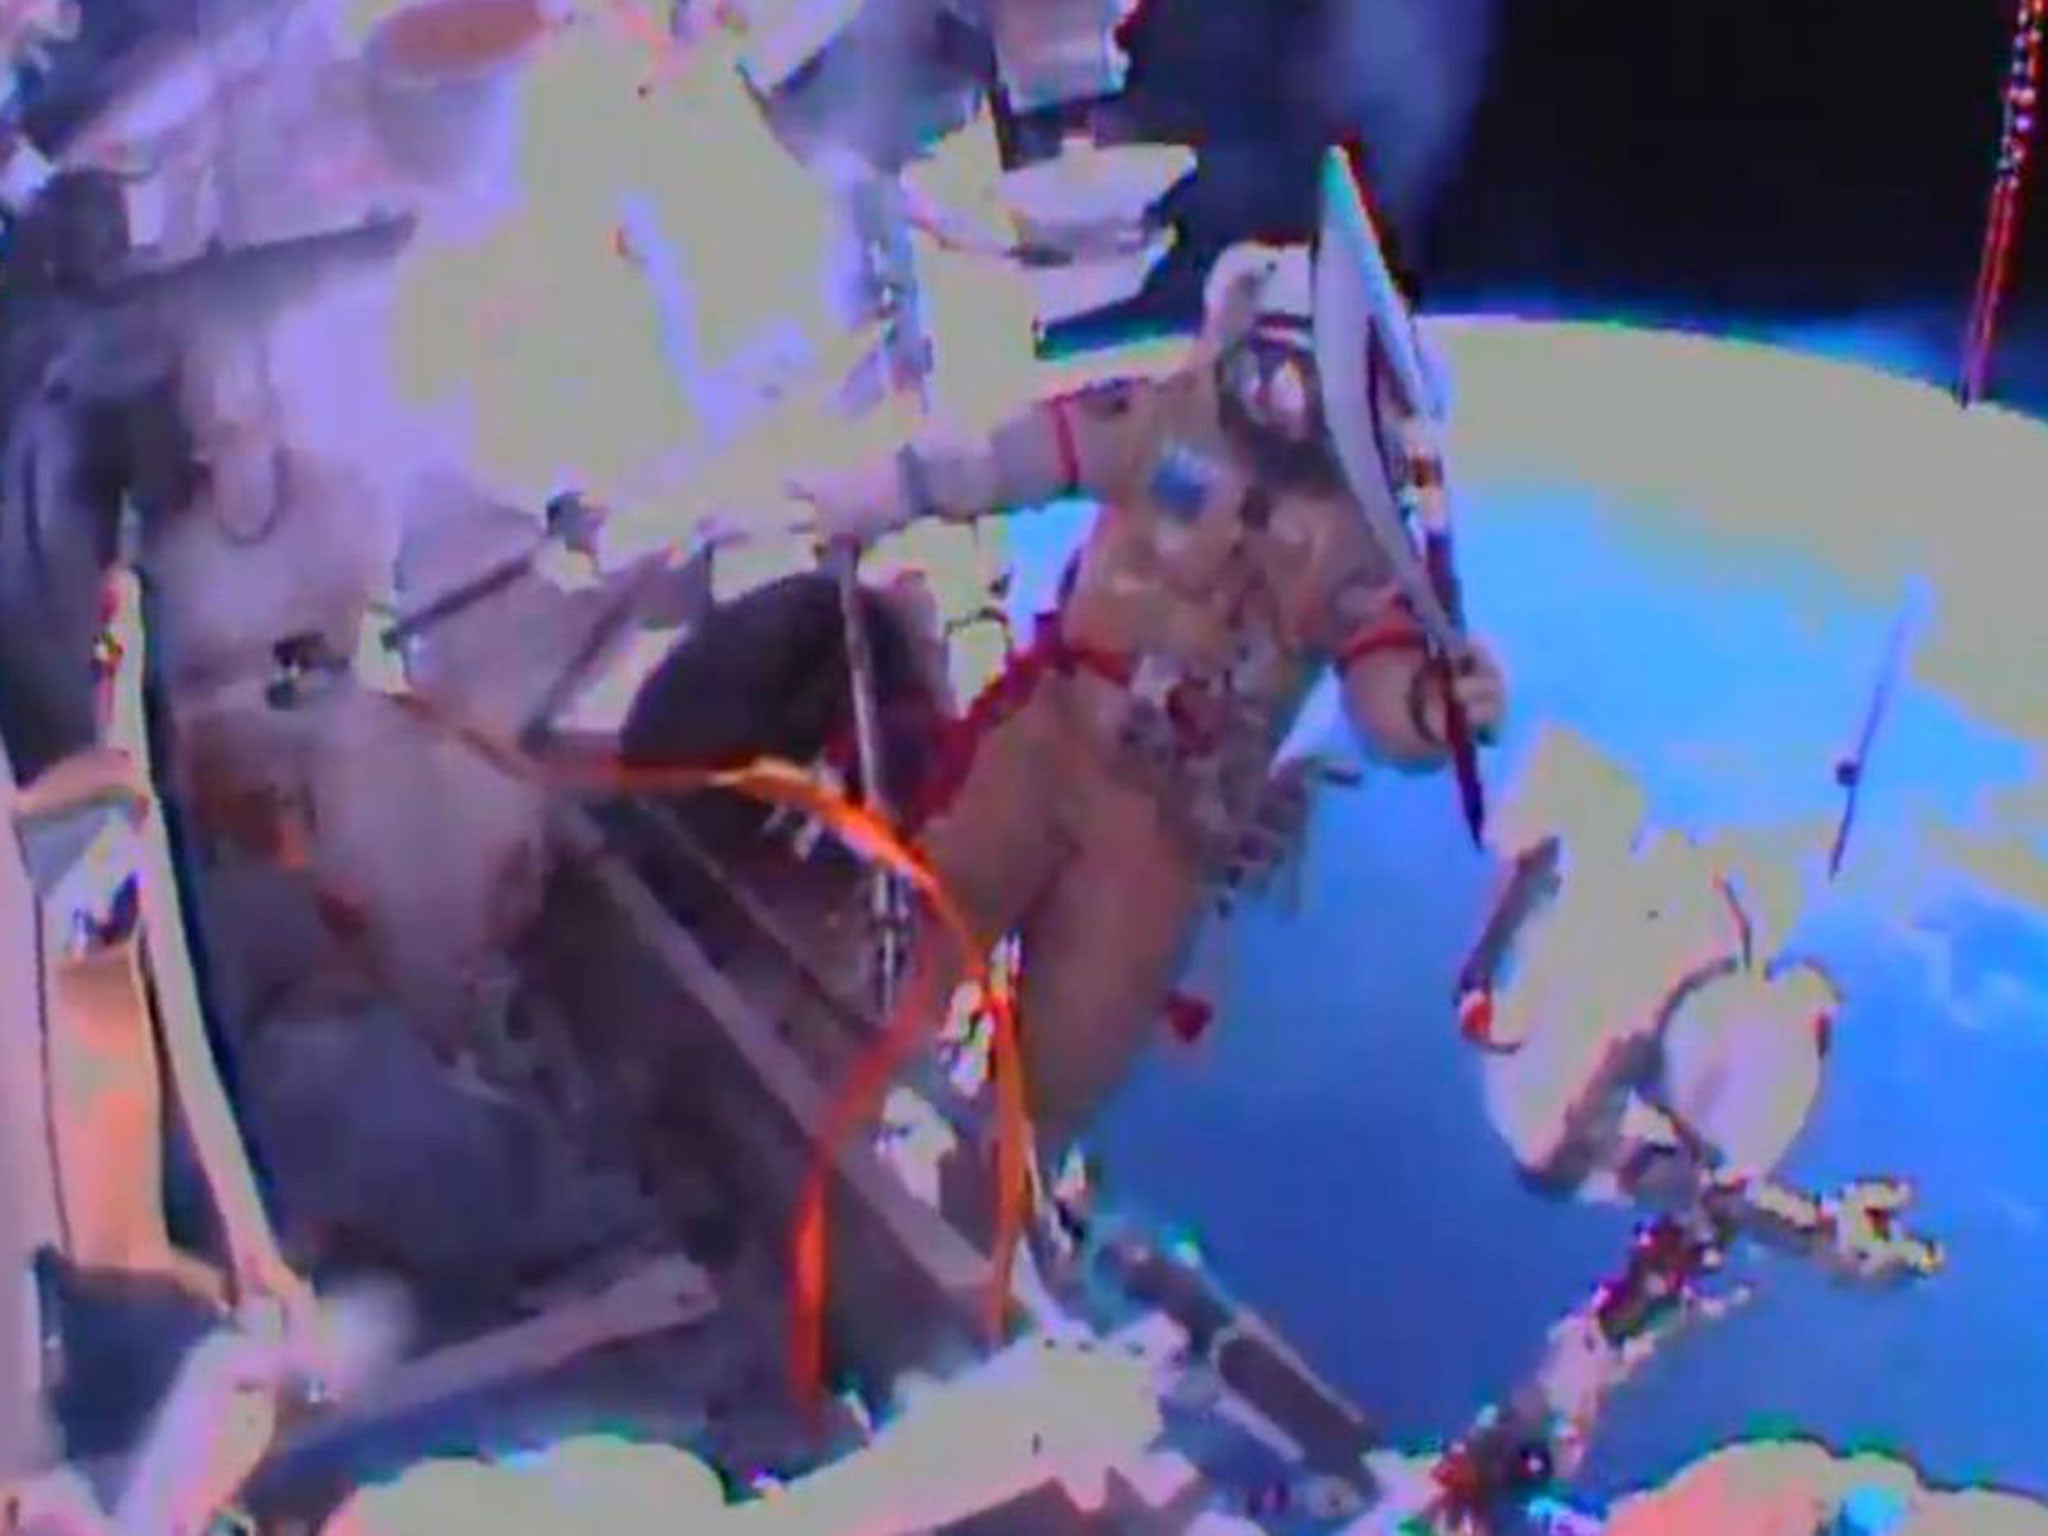 In this image obtained from Nasa TV, Cosmonaut Oleg Kotov exits the International Space Station on November 9, 2013, with the Sochi 2014 Winter Olympic Games torch.